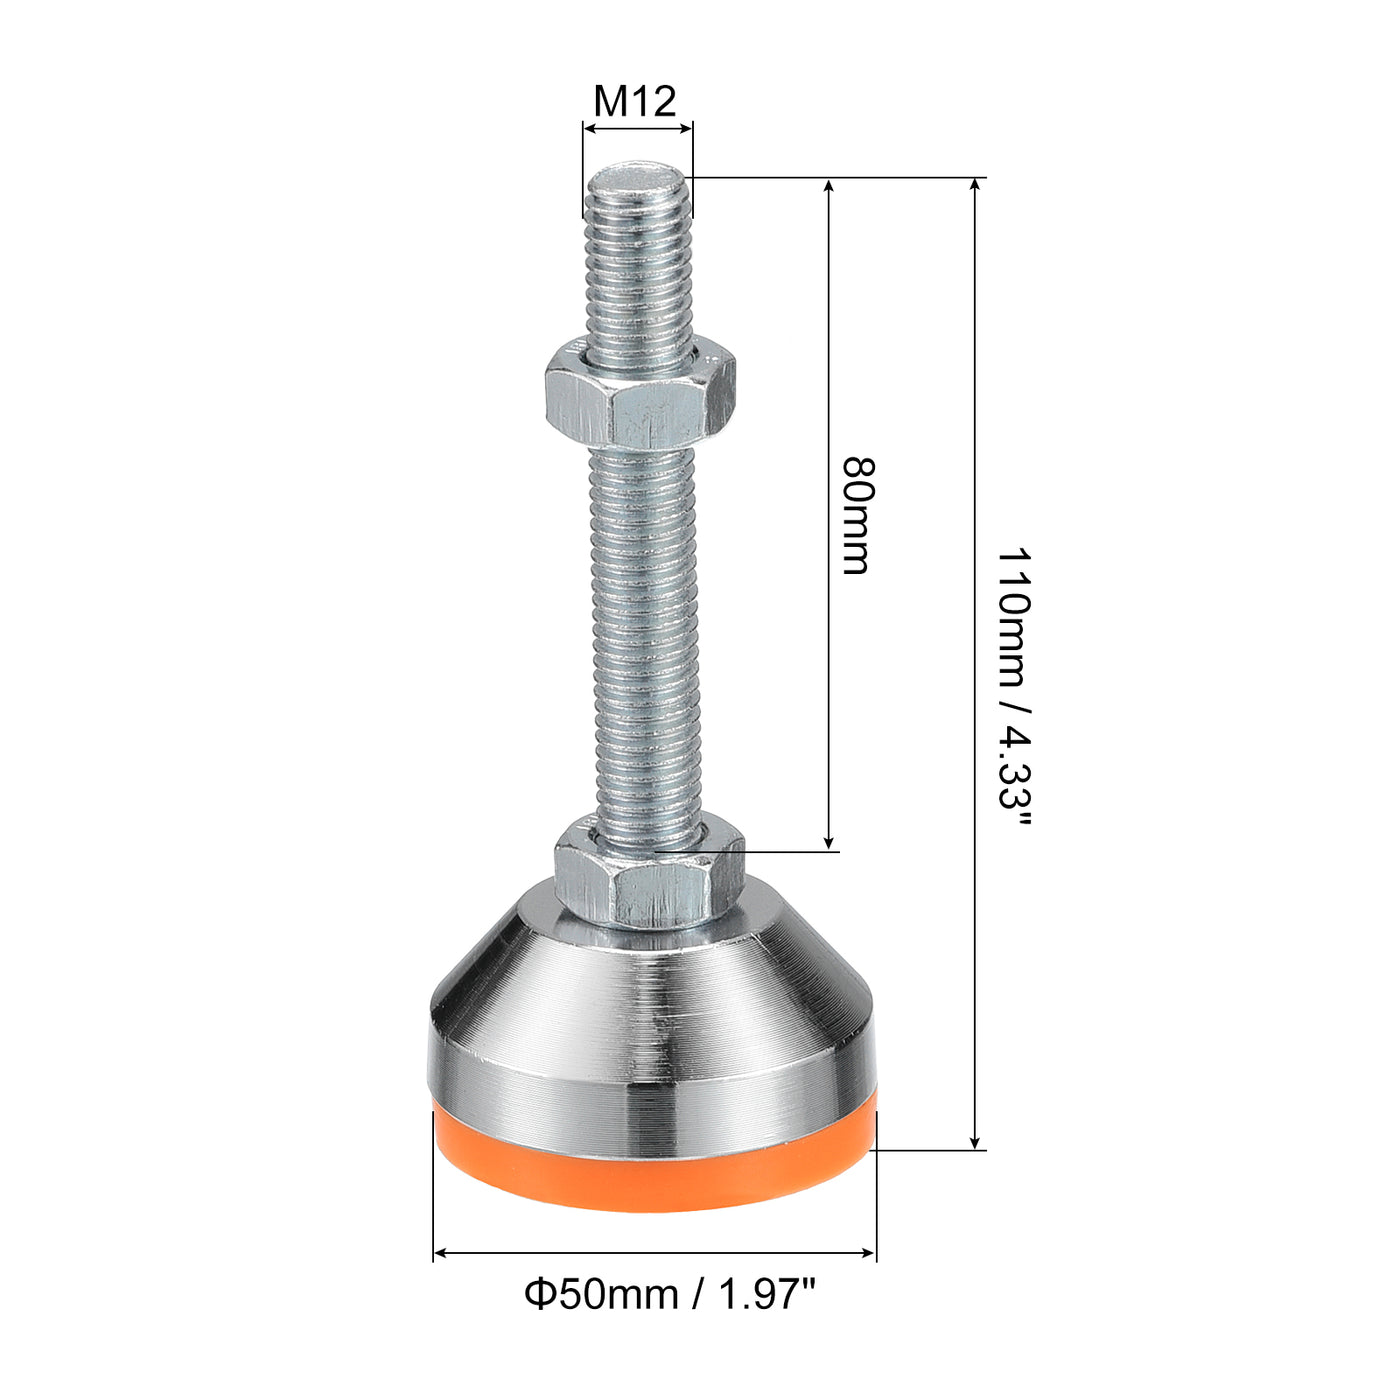 uxcell Uxcell Leveling Feet, 2Pcs M12x80x50mm - Carbon Steel Non-Skid Anti-shock Adjustable Table Feet, Leveling Screw Leg for Furniture Workshops Equipment